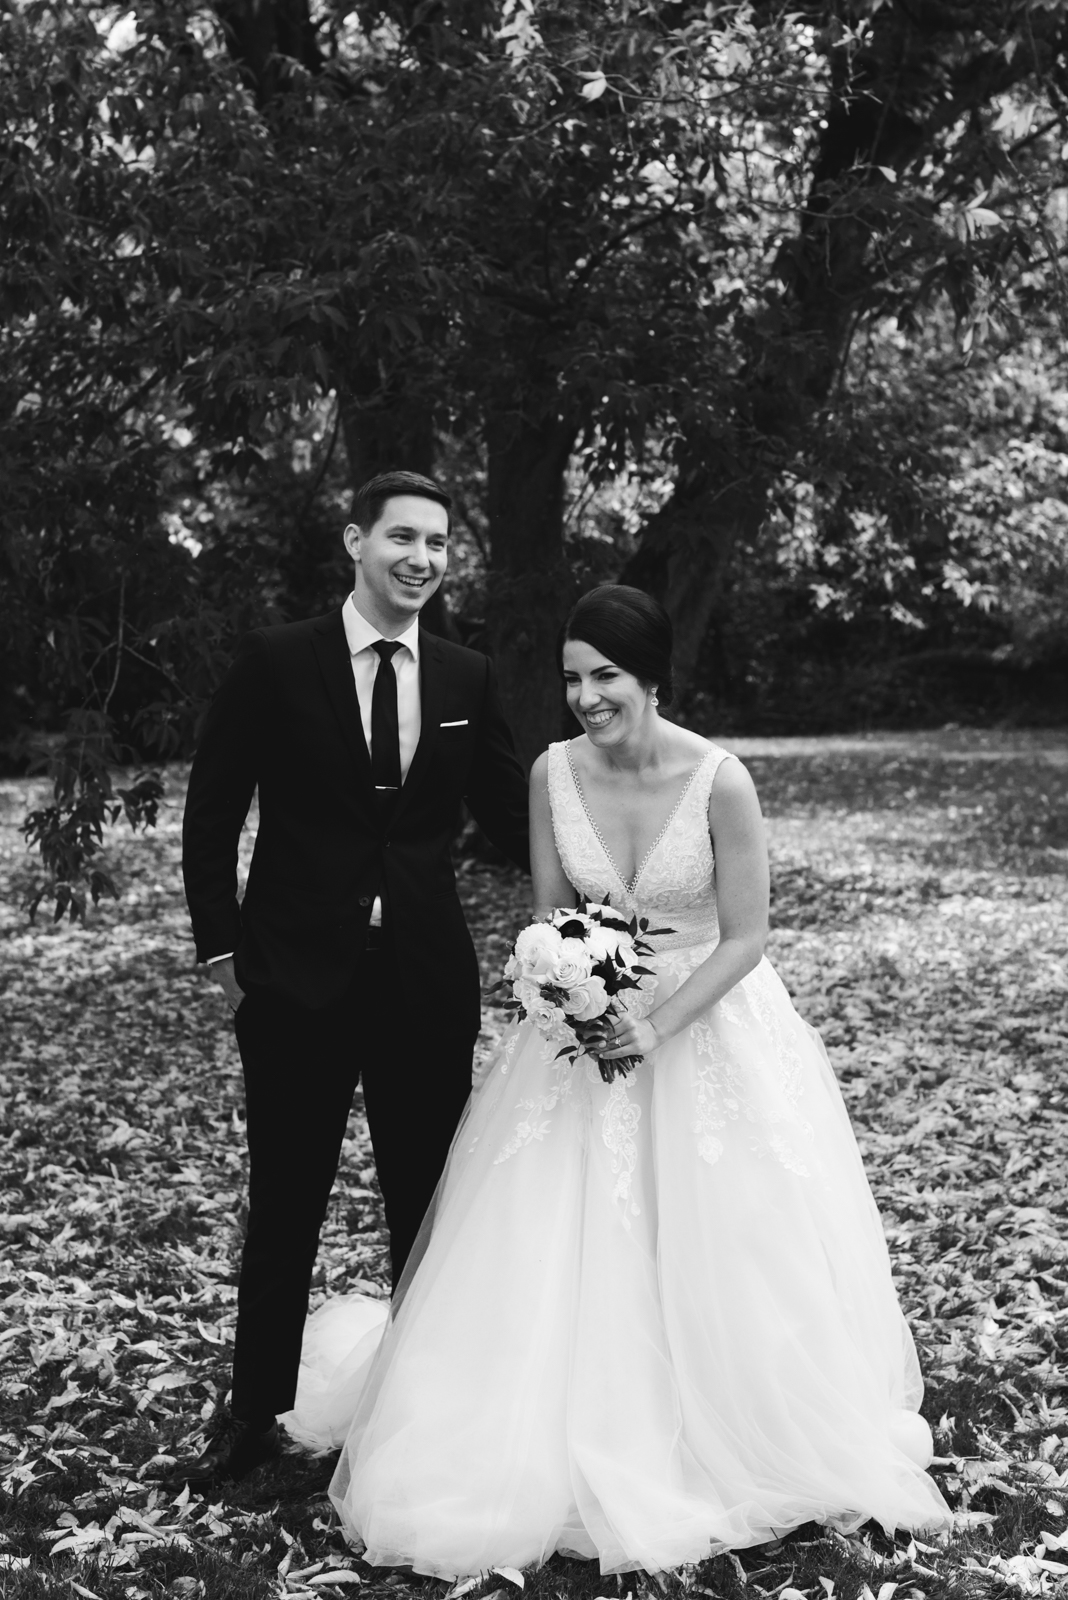 bride and groom laughing outdoors in black and white